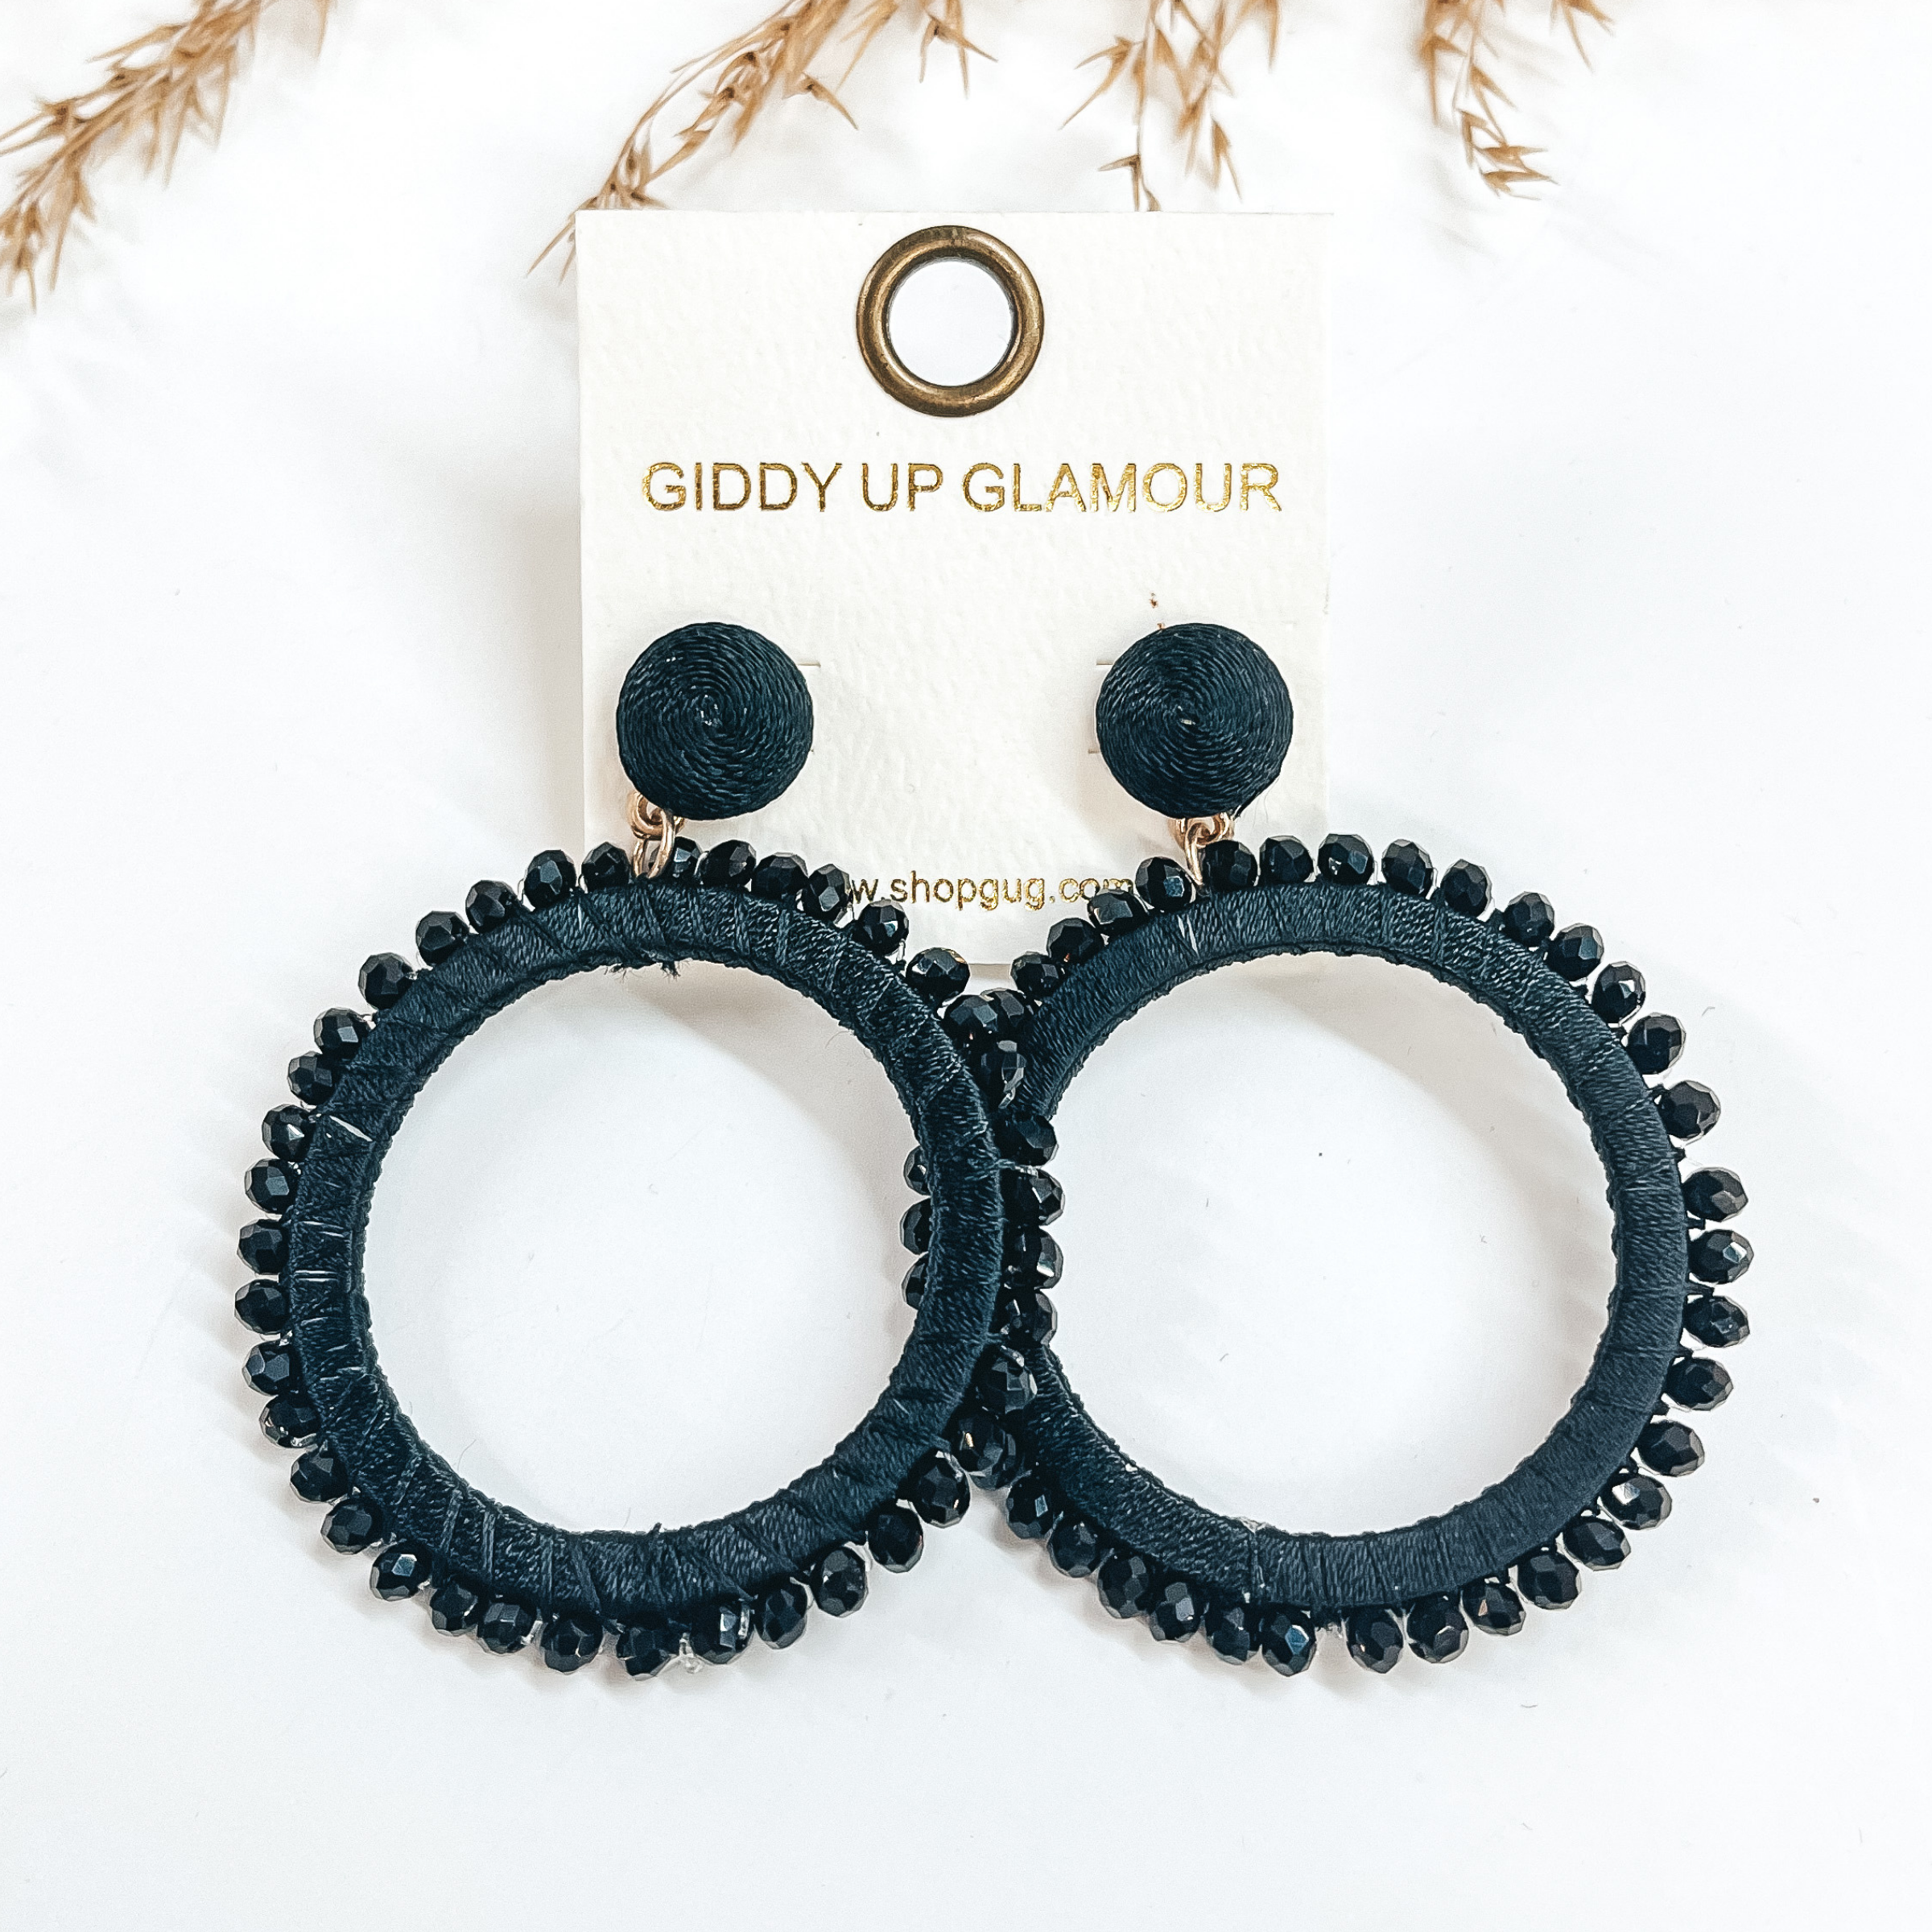 Black post back circle drop earrings. Black colored beads all around the circle and the circle is wrapped with black colored thread.  Taken on a white background with a brown plant in the back as decor.